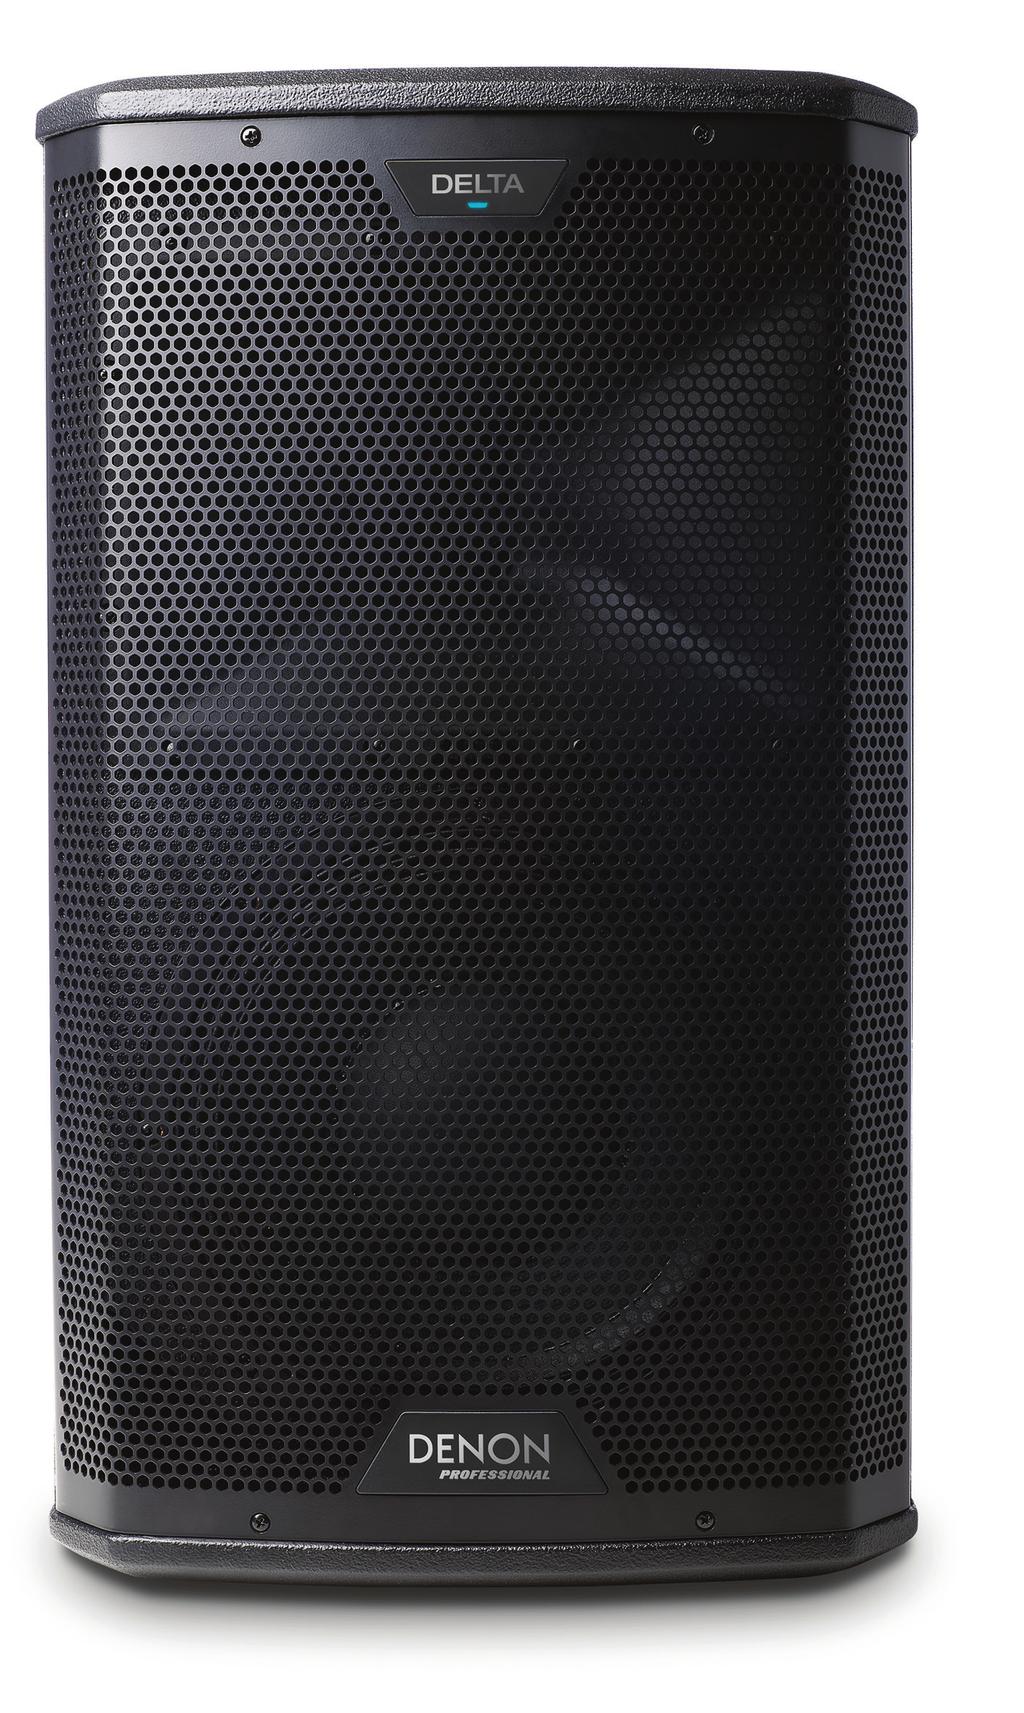 -INCH 2-WAY 2-WATT LOUDSPEAKER WITH WIRELESS CONNECTIVITY For situations that demand the ultimate in speaker performance, Denon Professional proudly offers the Delta Series a family of powered